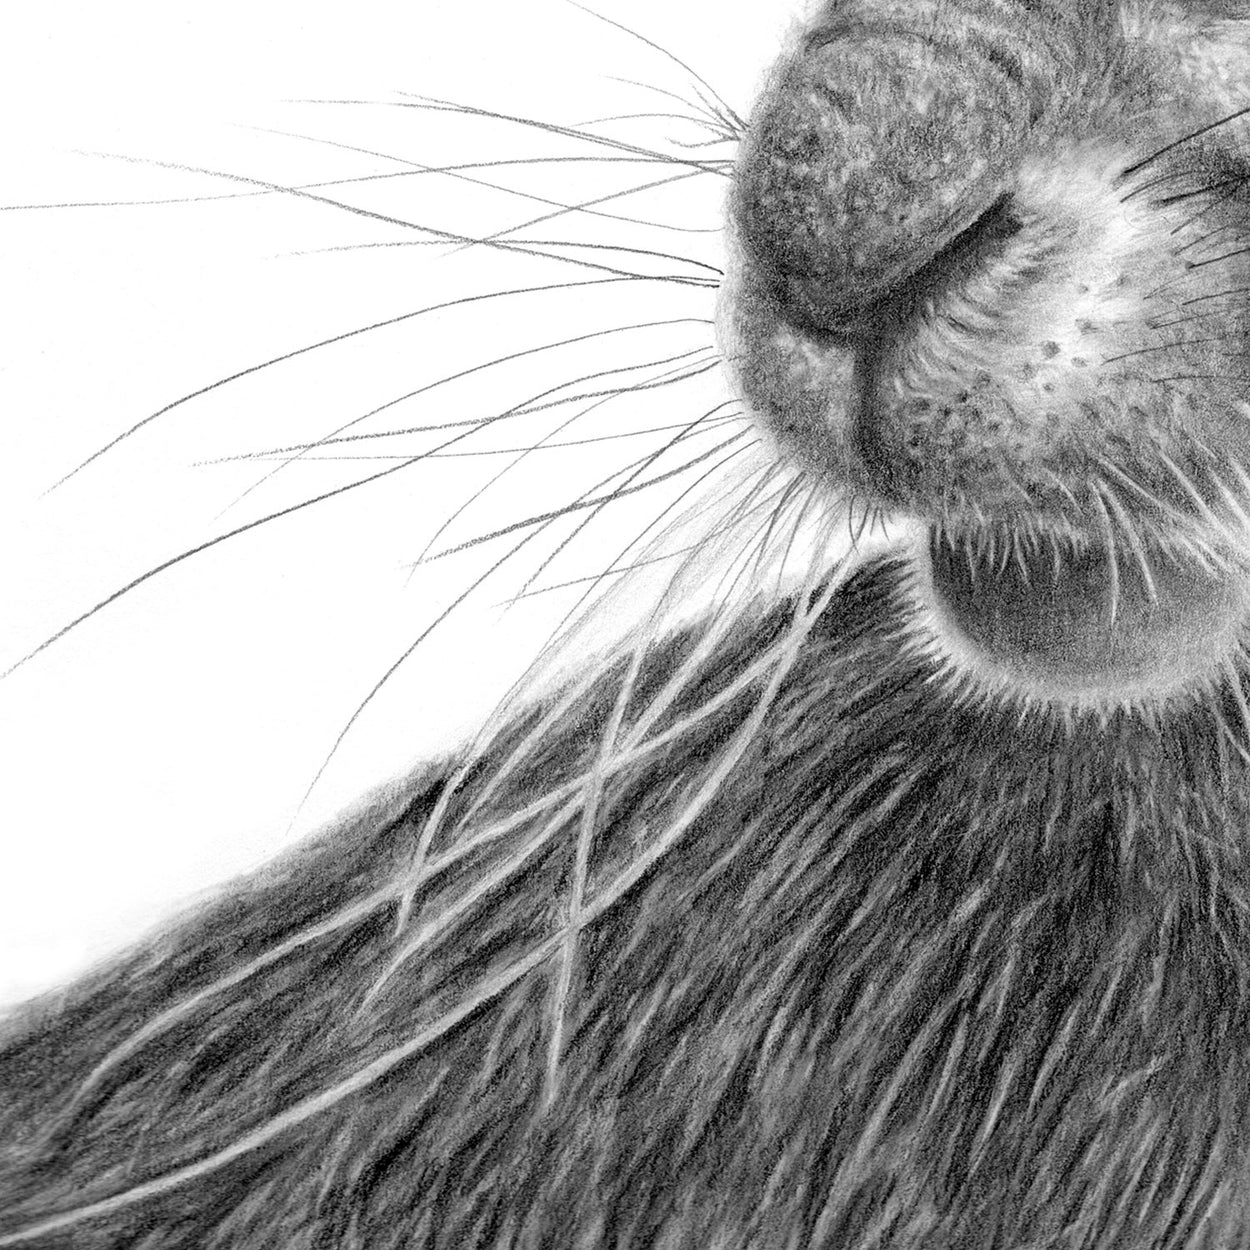 Hare Drawing Close-up 2 - The Thriving Wild - Jill Dimond